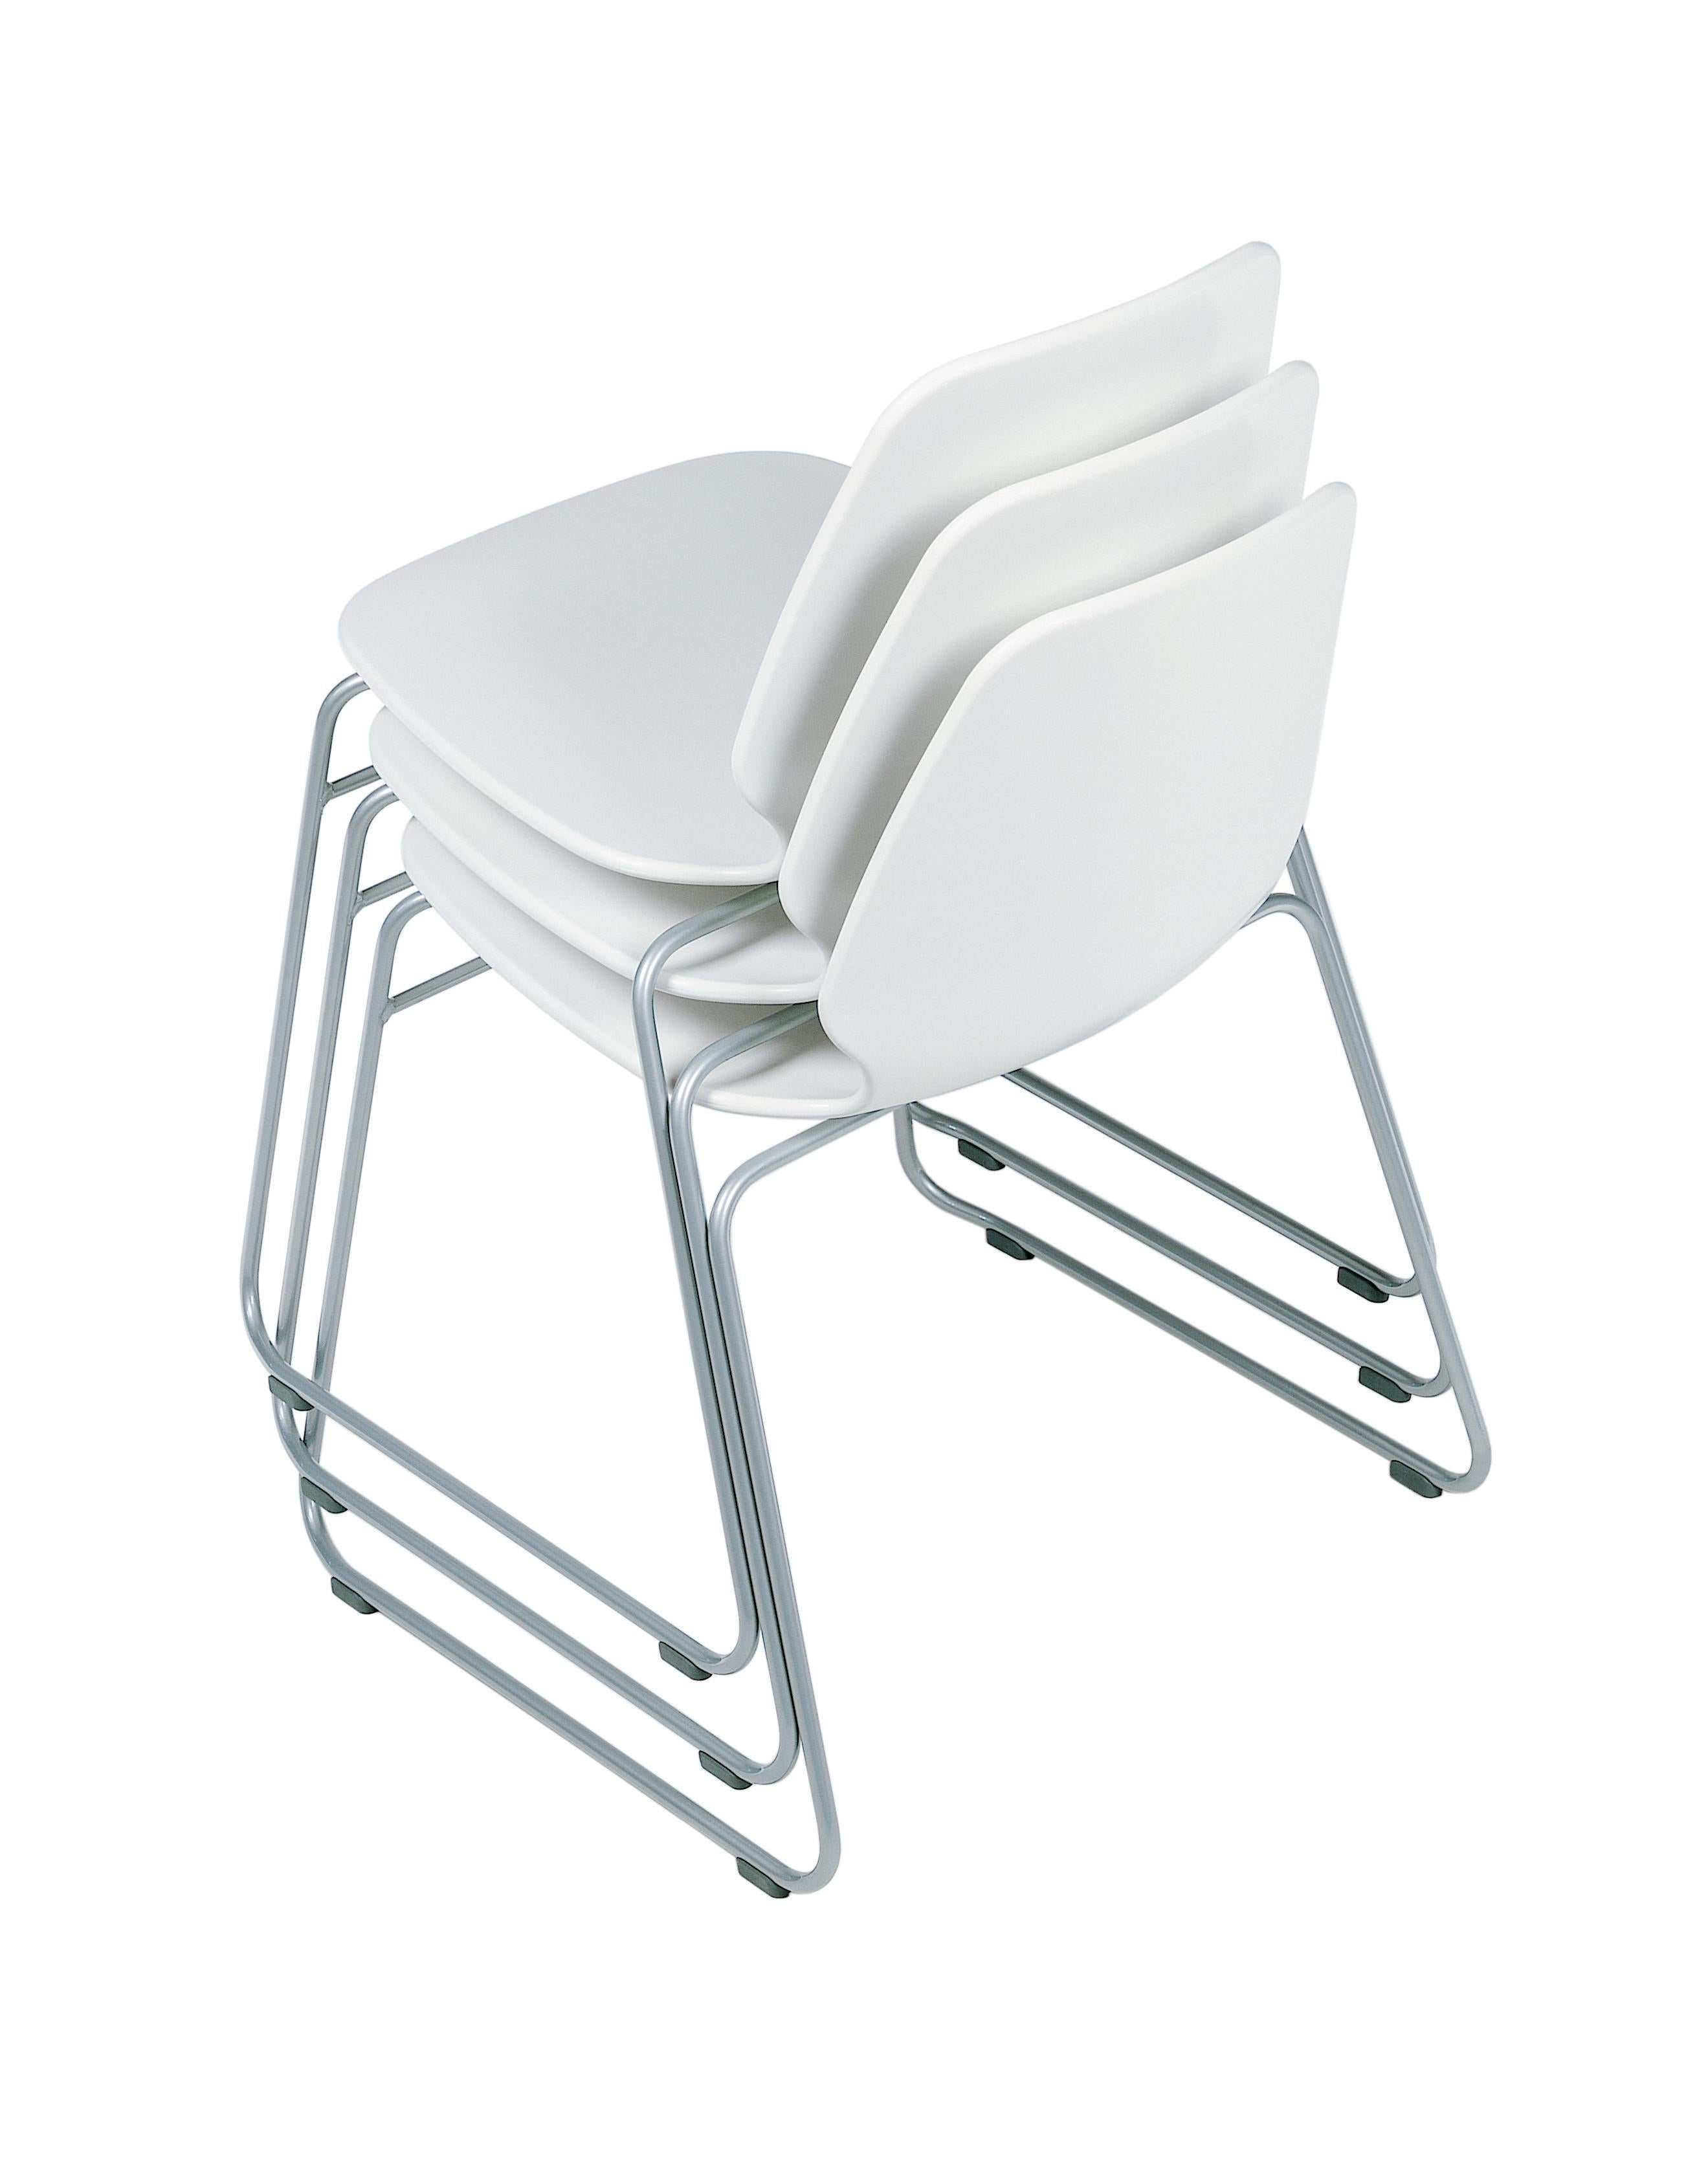 Alias 531 Selinunte Sledge Chair in White and Steel Frame by Alfredo Häberli

Stacking chair with structure in lacquered or chromed steel; seat and back in solid plastic material.

Born in Buenos Aires in 1964, he moved to Zurich in 1977, where